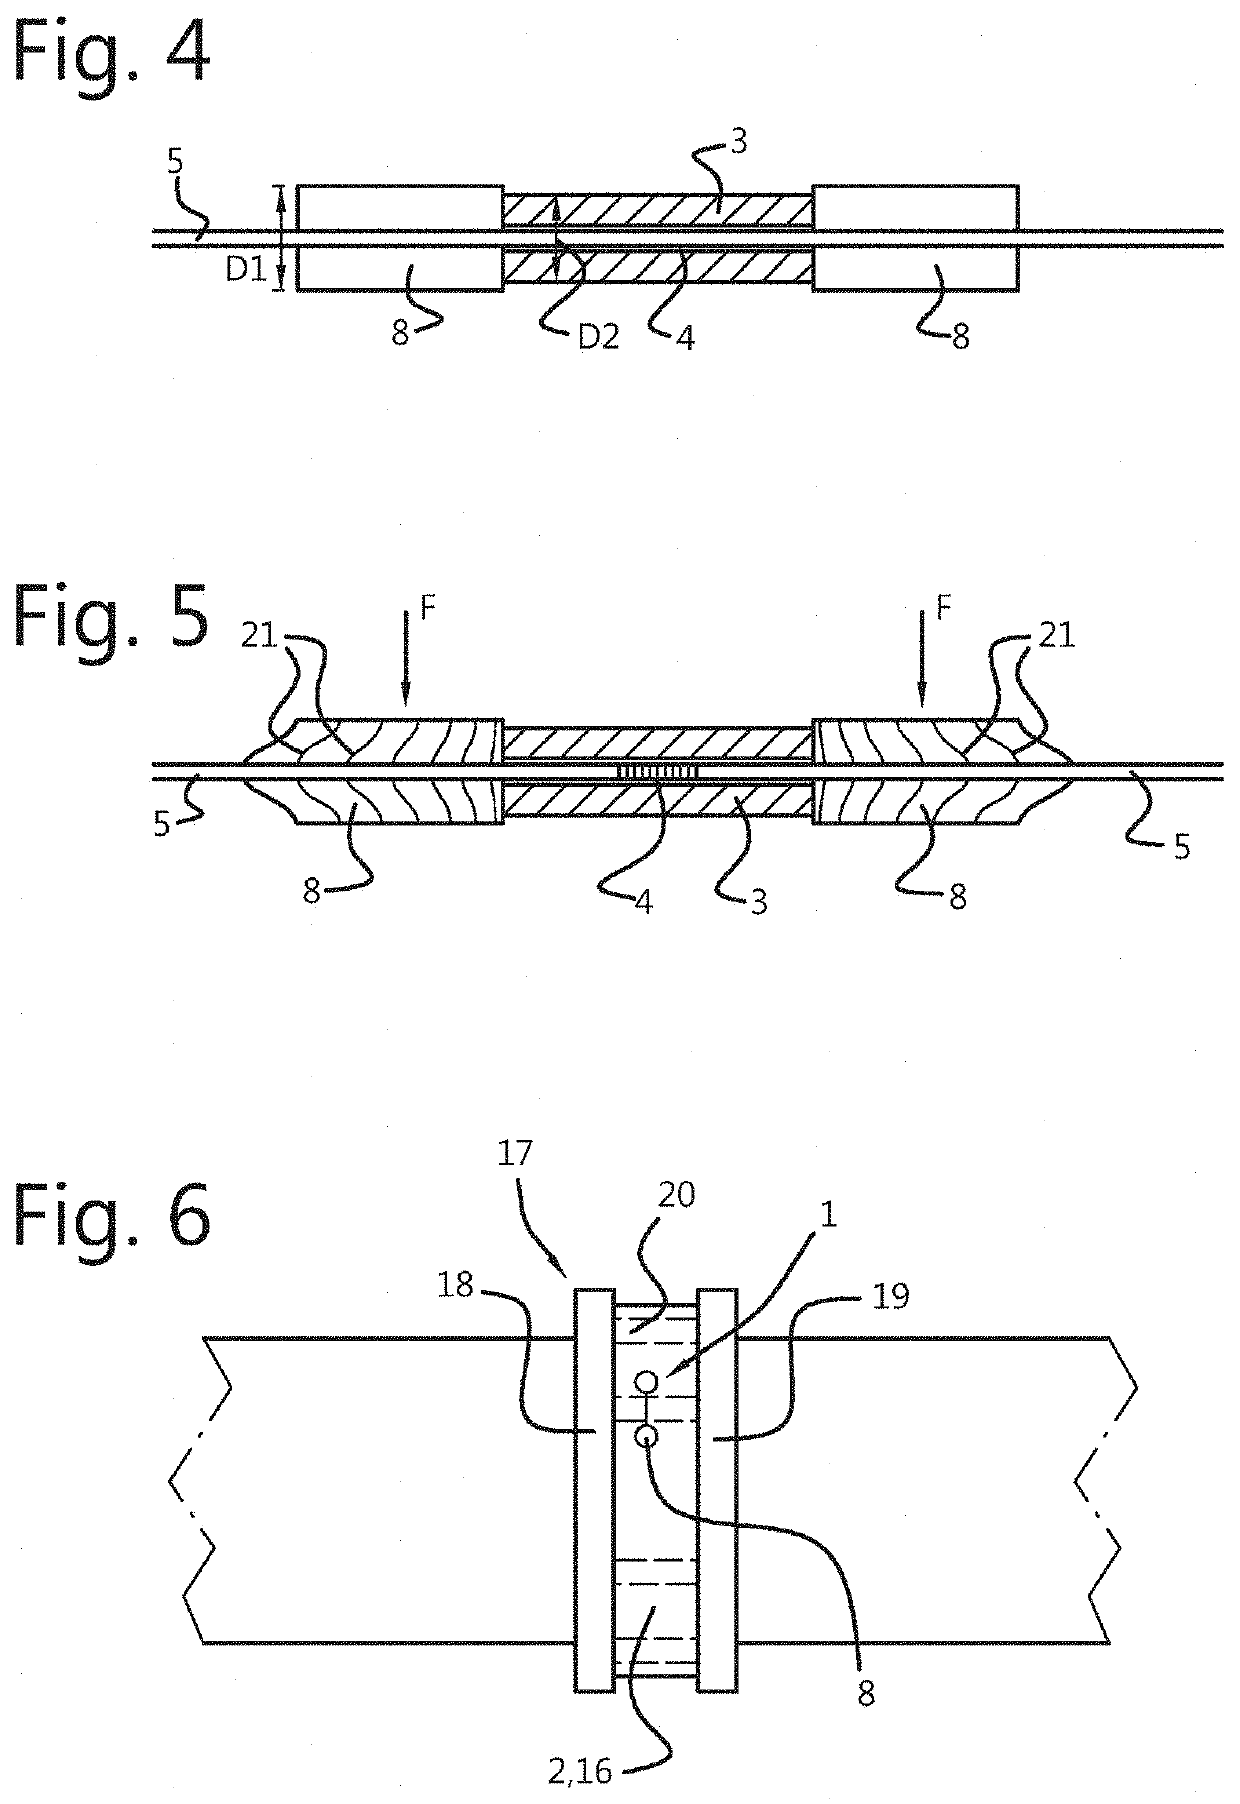 Optical Fiber Sensing Device for Sensing the Distribution of the Compression or Deformation of a Compressible or Deformable Element